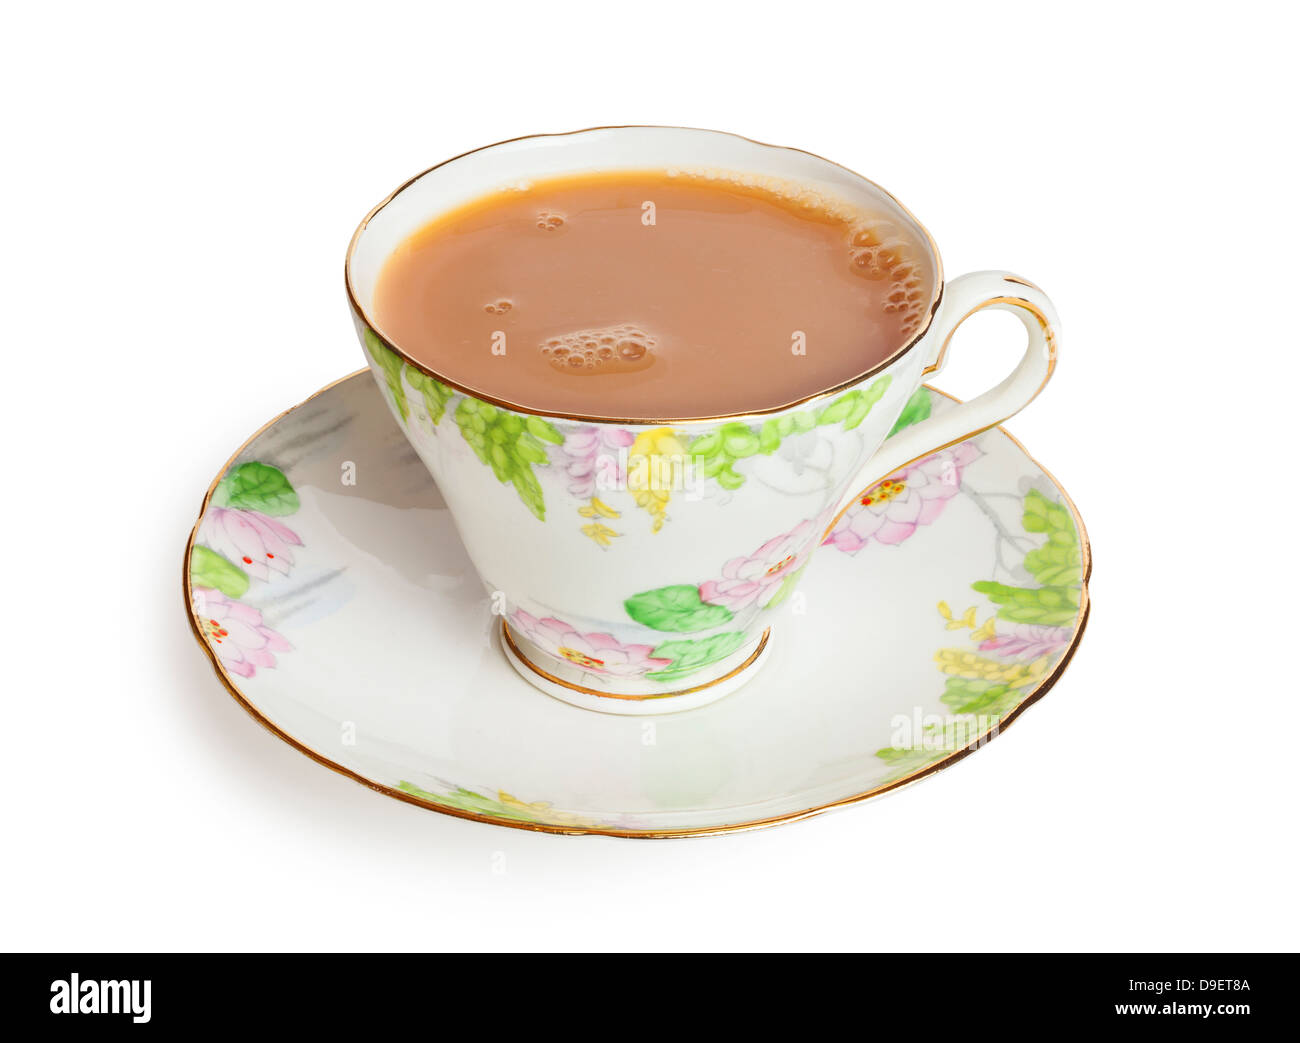 Cup of Tea with milk in a pretty bone china cup, freshly poured with bubbles on surface, front to back focus, isolated on... Stock Photo